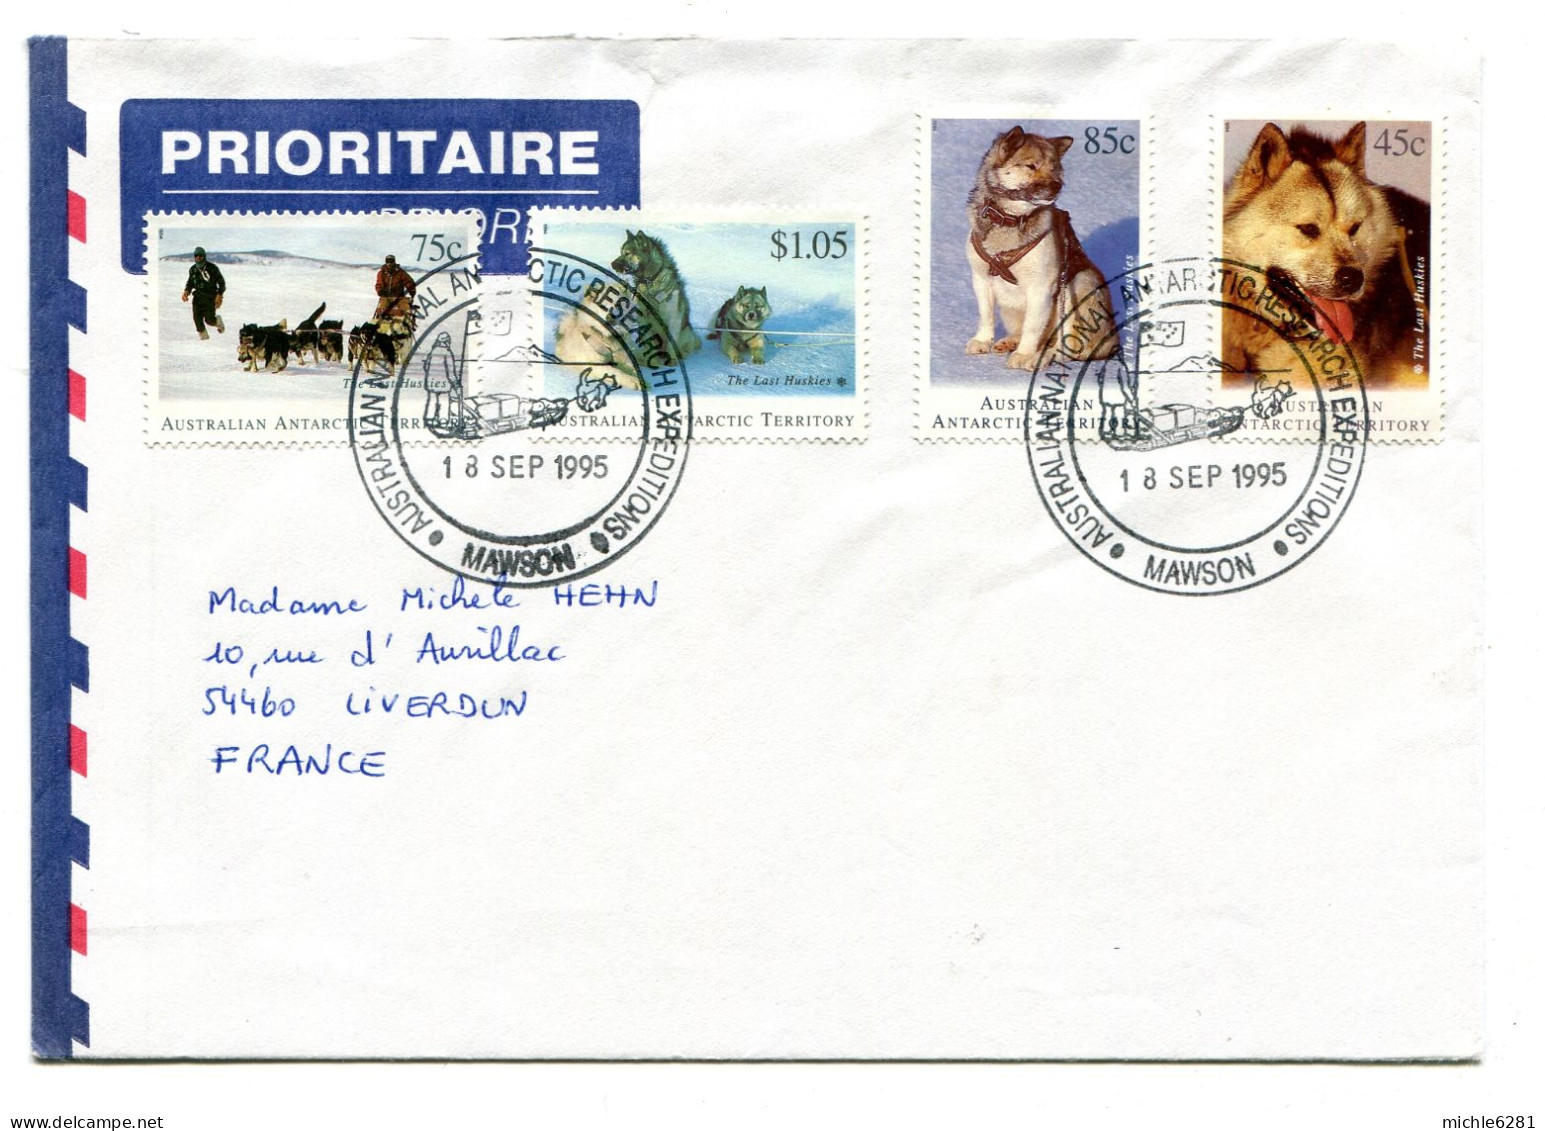 0098 - 0099 - 0100 - 0101 - 1994 - Lettre Pour La France - Mawson - Australian National Antartic Research Expeditions - Covers & Documents